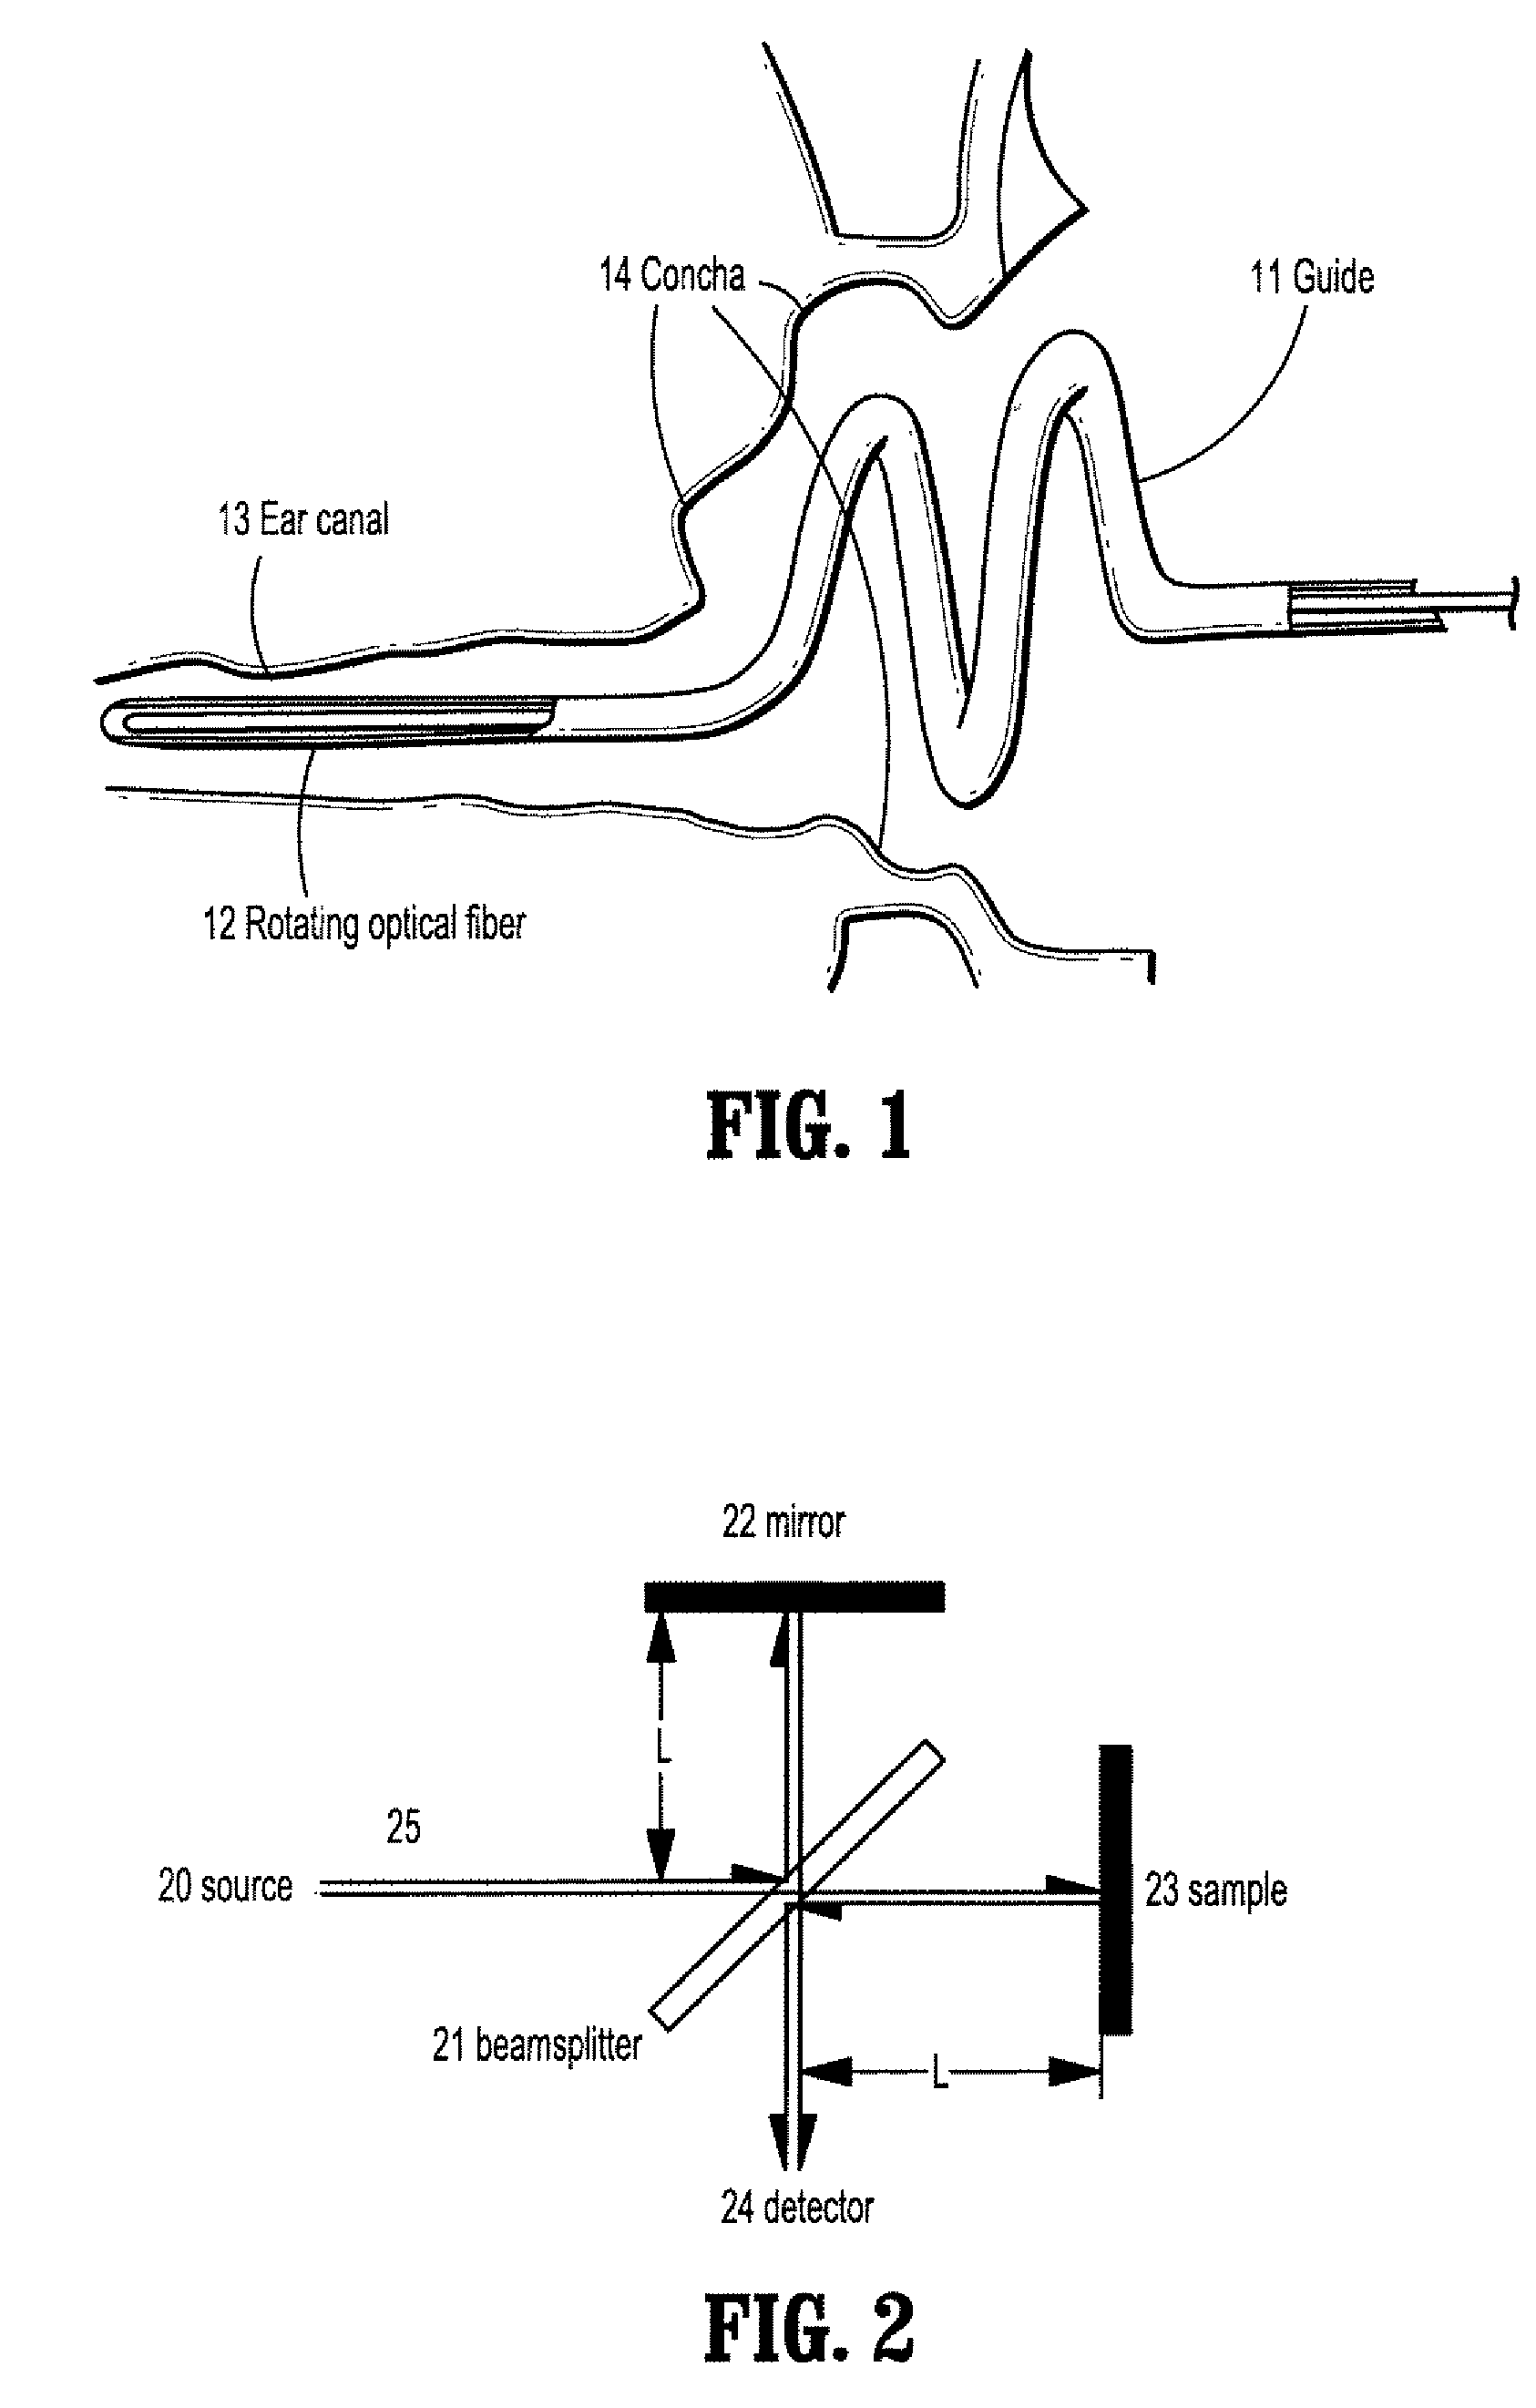 System and method for reconstruction of the human ear canal from optical coherence tomography scans